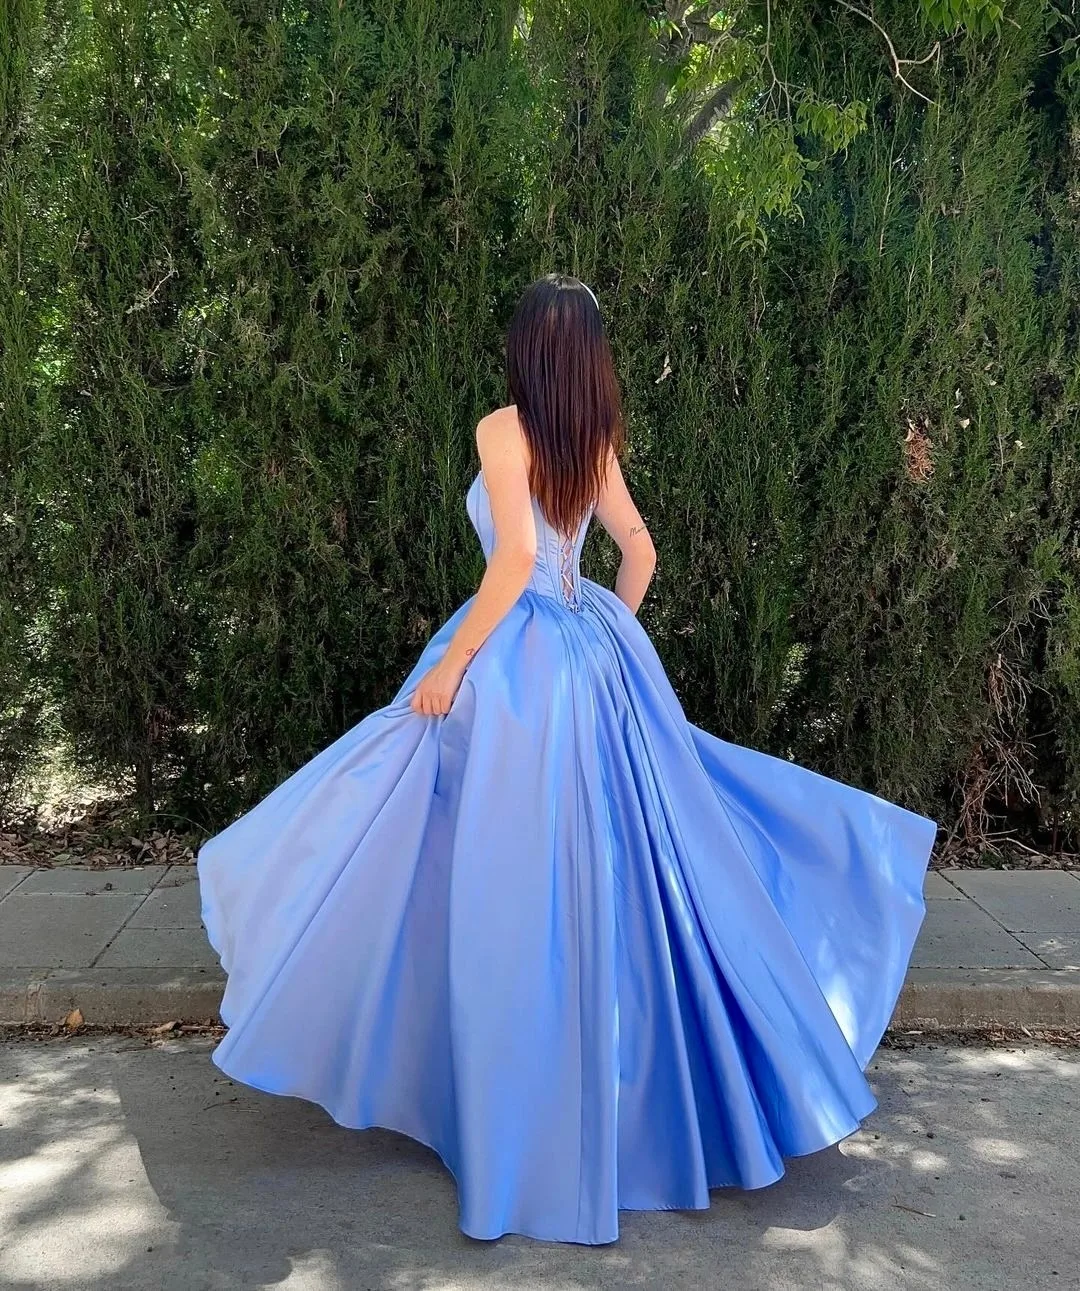 Sexy Strapless Satin Prom Dresses With Ruched Exquisite Lace Up Back A-Line Long Homecoming Cocktail Dance Party Ball Gowns